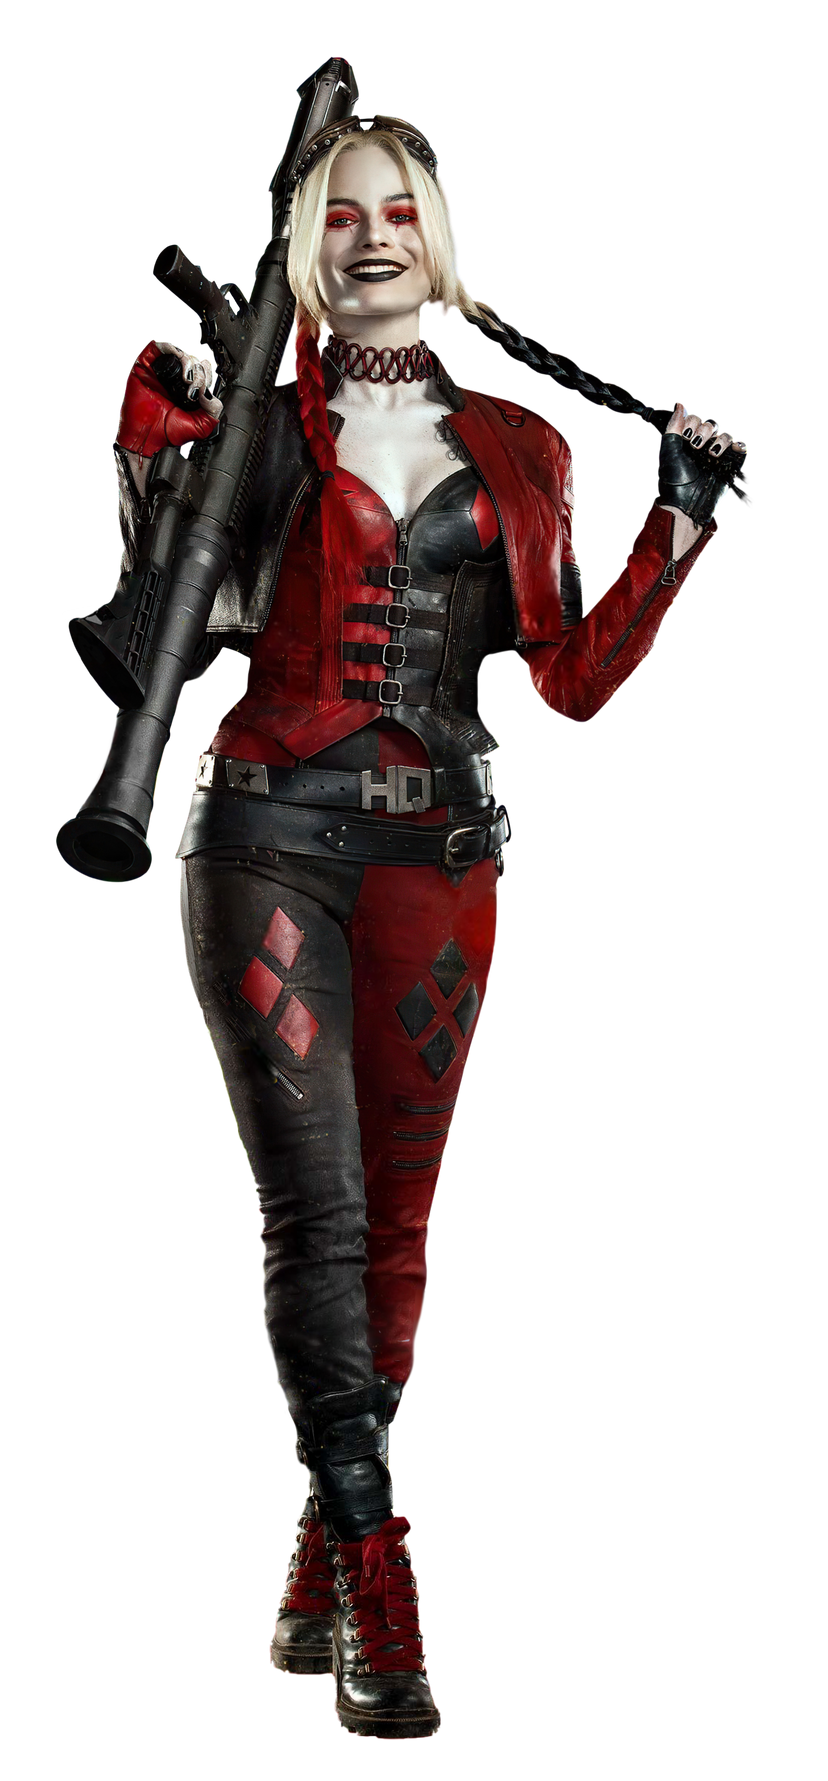 https://static.wikia.nocookie.net/villains/images/d/d0/Harley_Quinn_DCEU_render.png/revision/latest?cb=20231117031011